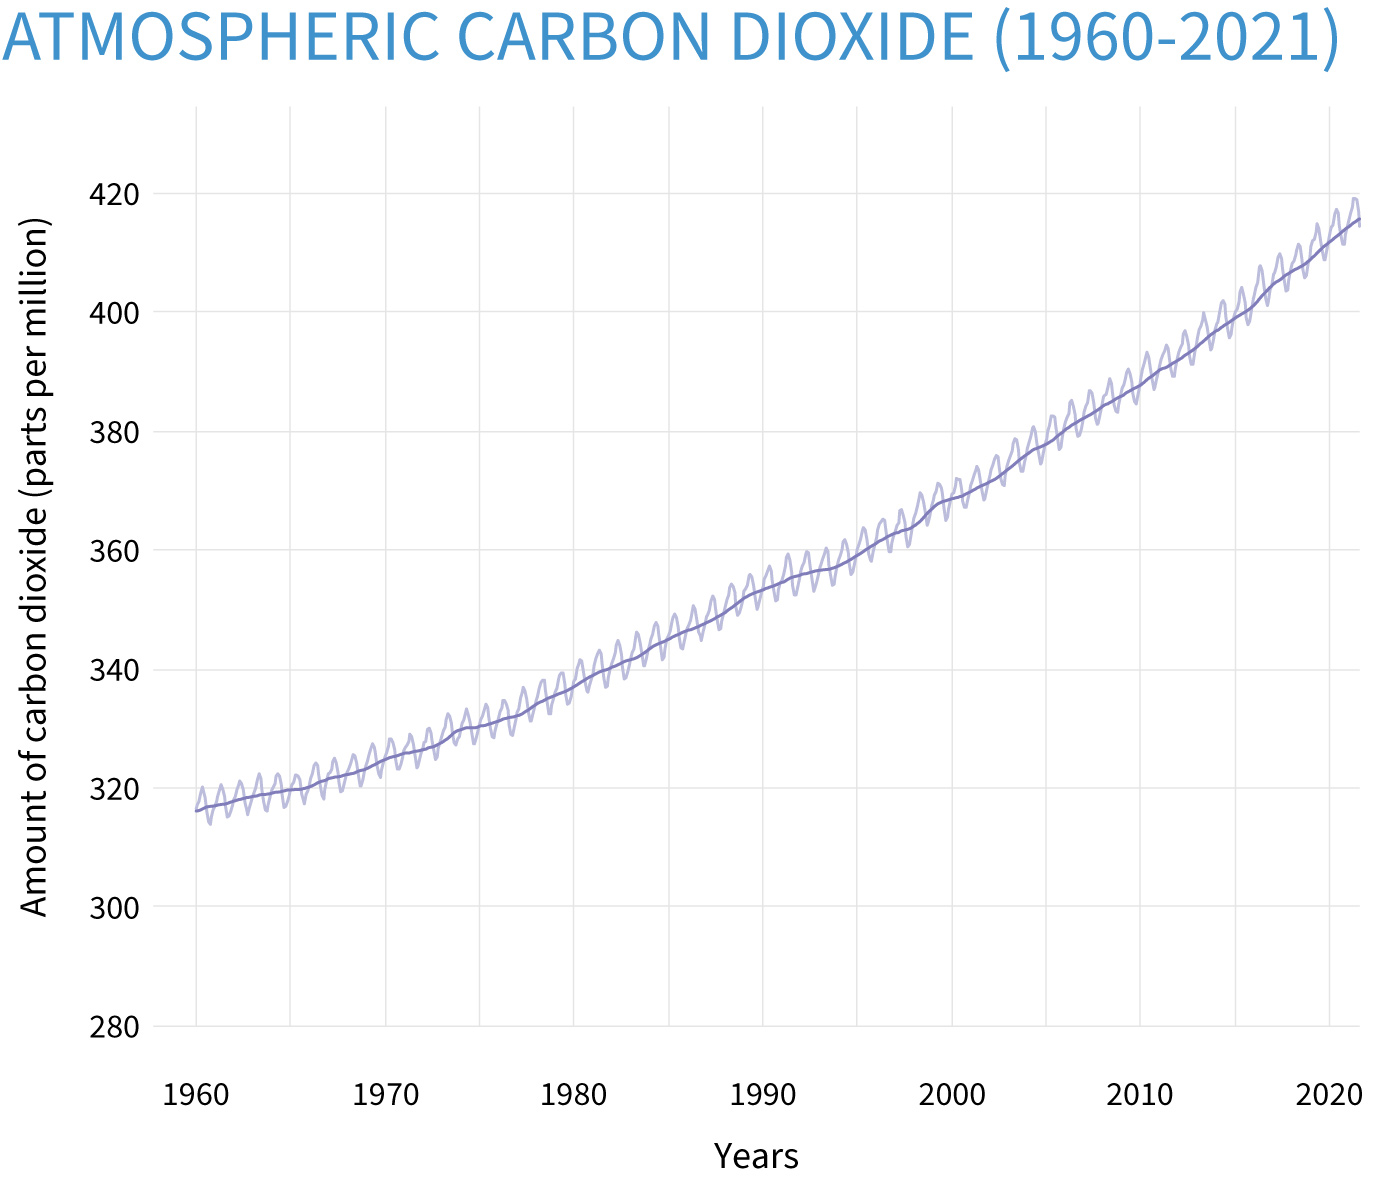 LIne graph of monthly atmospheric carbon dioxide levels and the 12-month running average